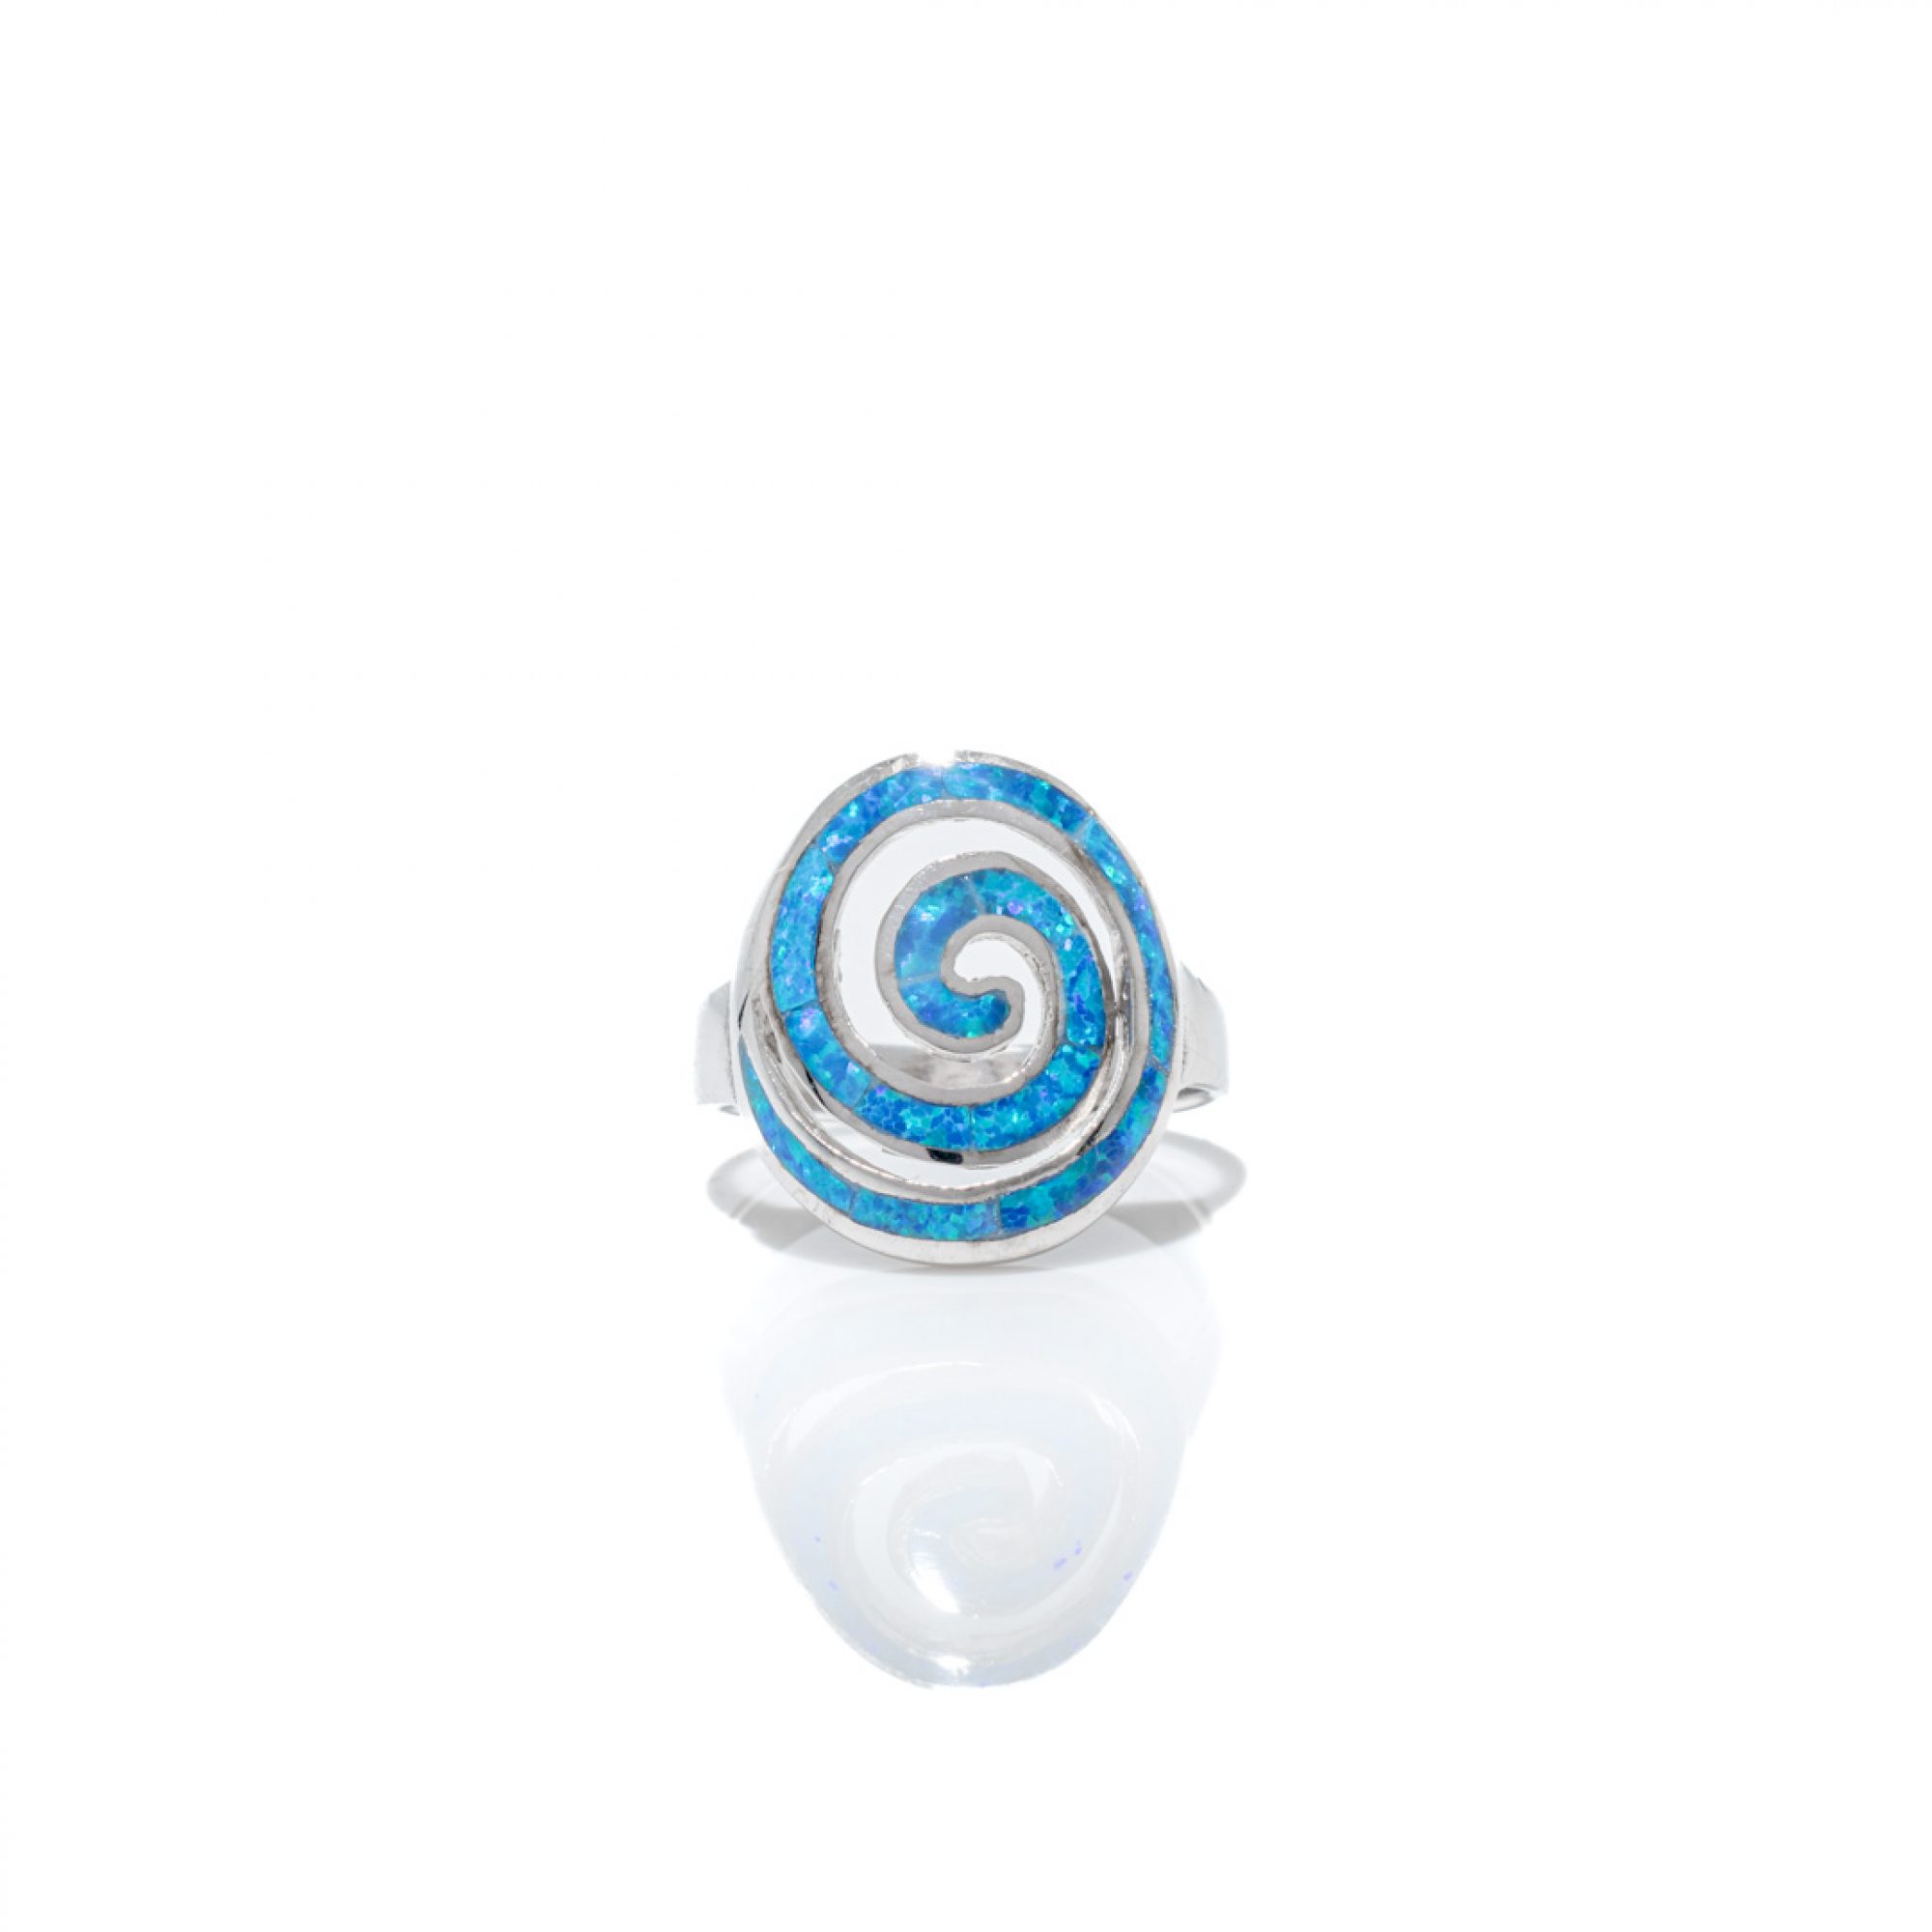 Silver spiral ring with opal stones 